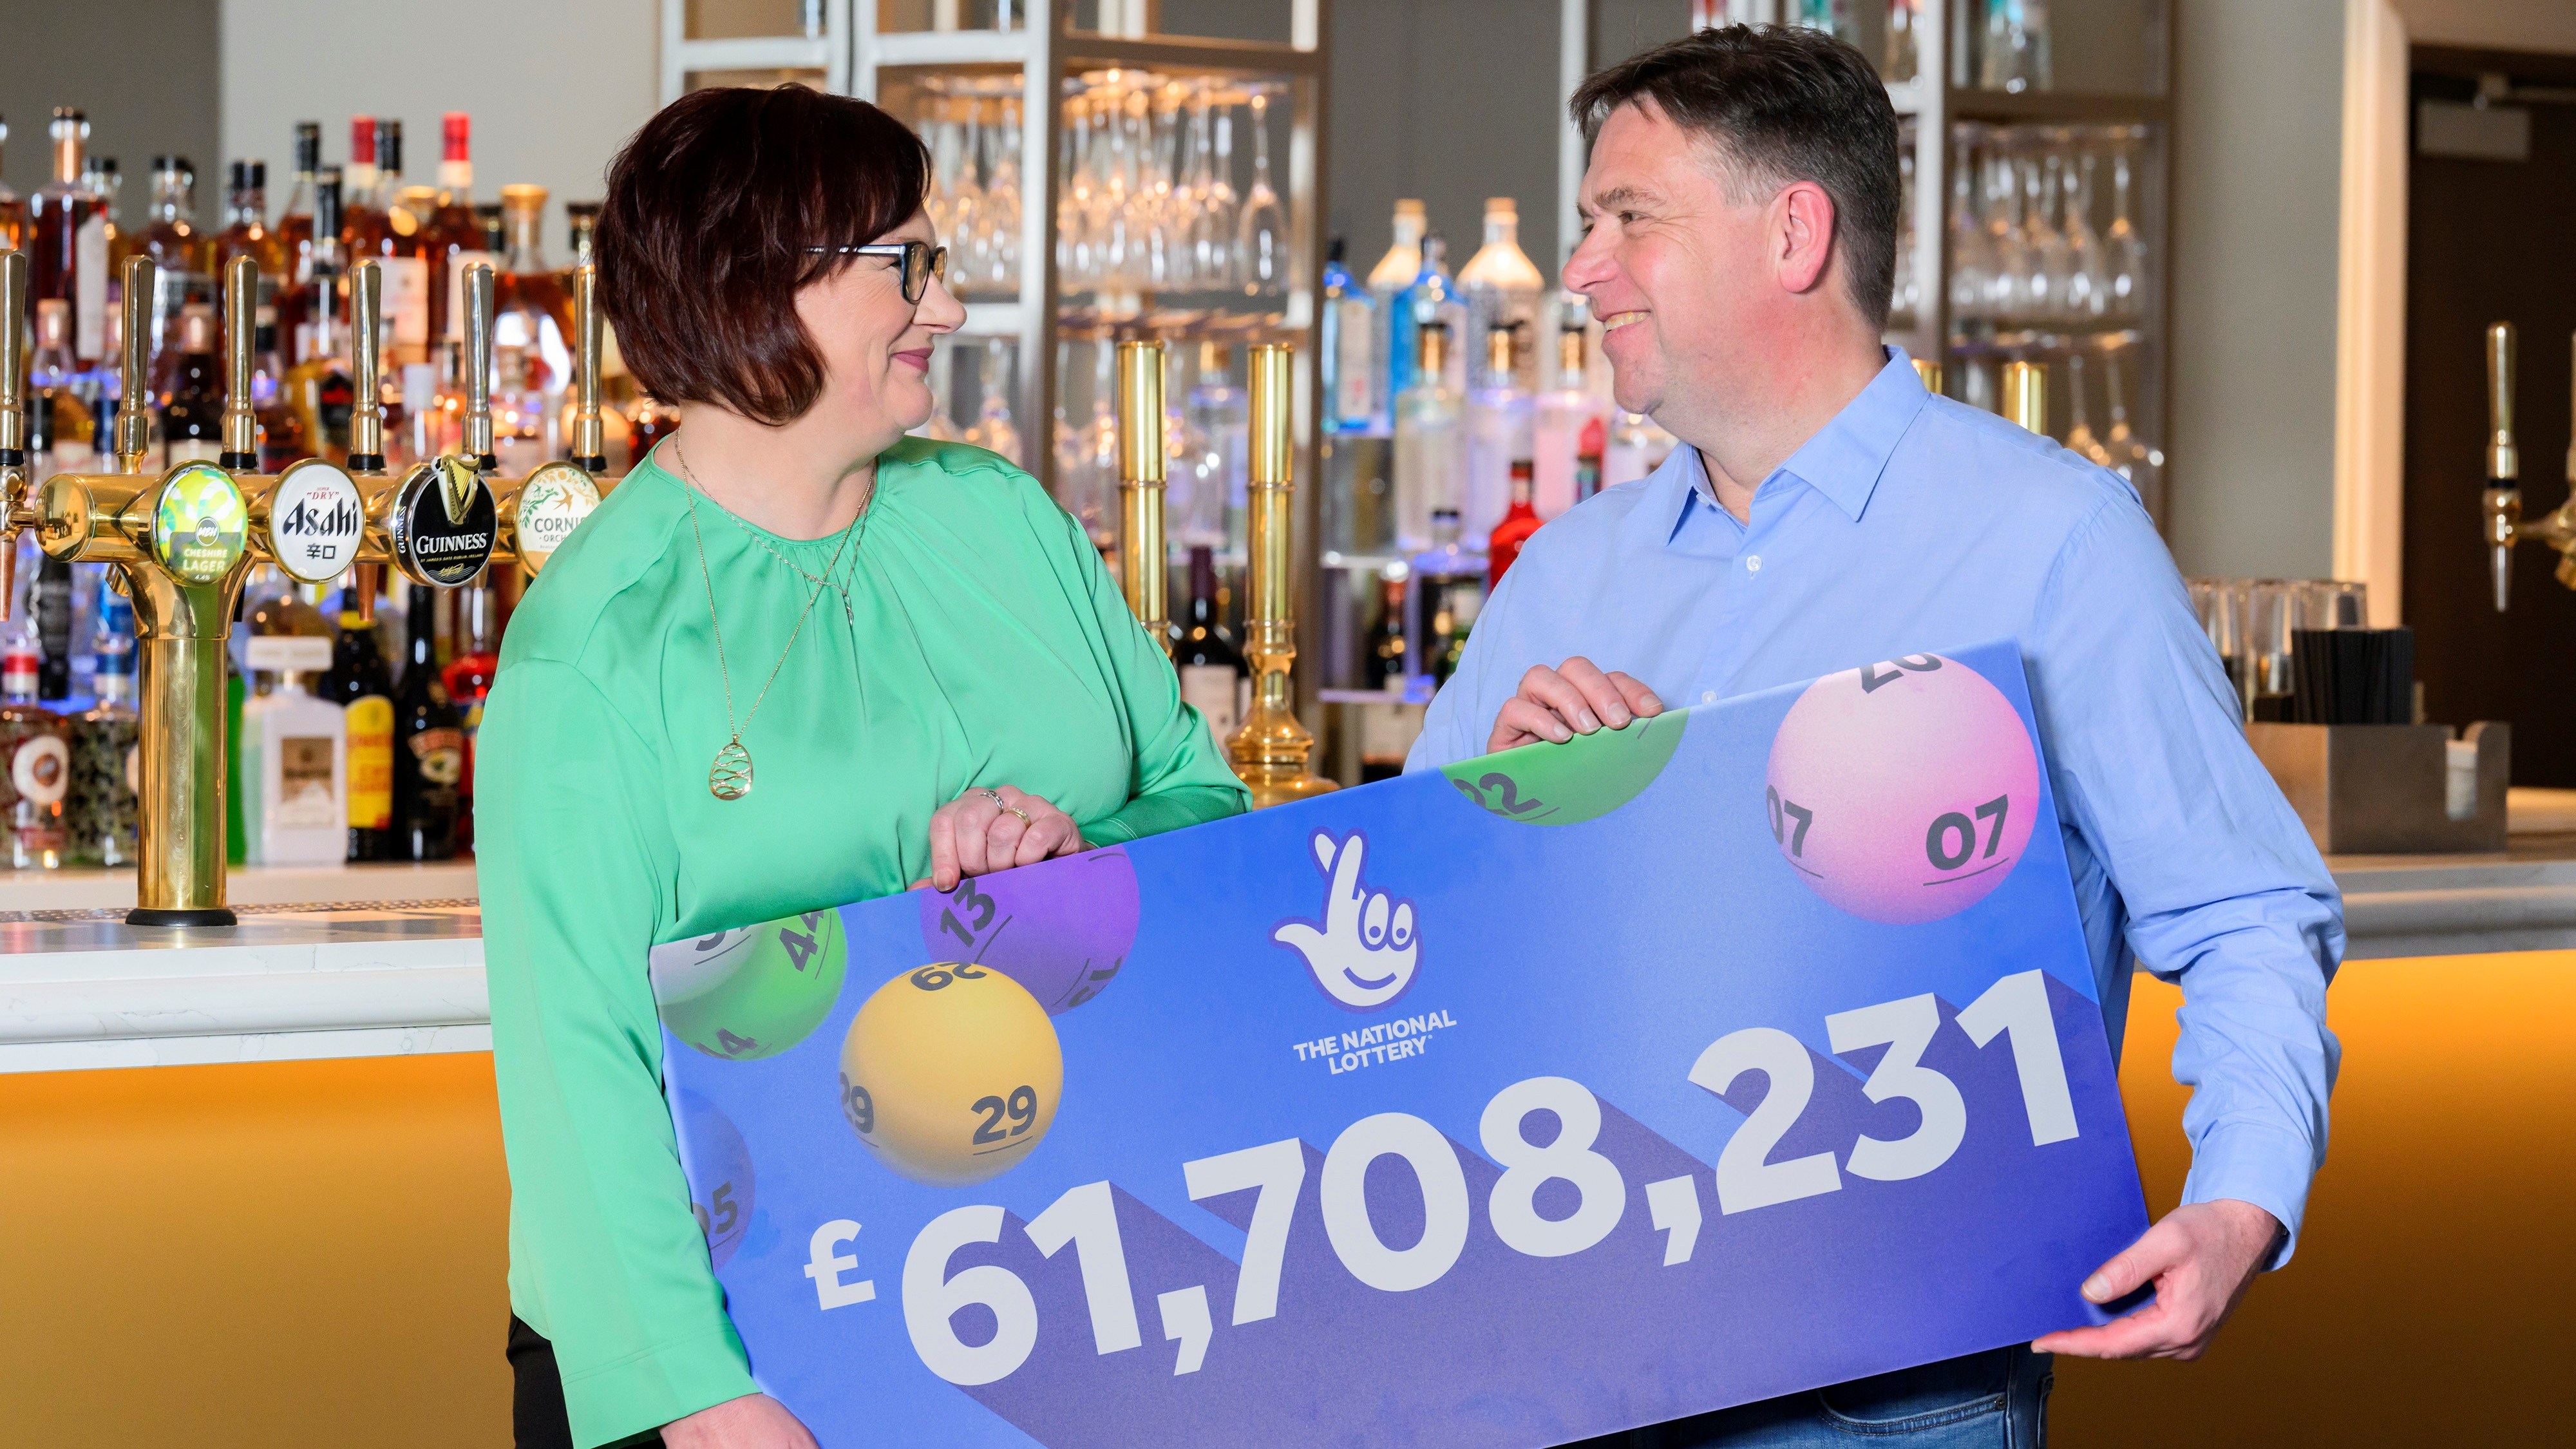 Richard and Debbie Nuttall from Colne, Lancashire, celebrate after landing more than £61 million in January